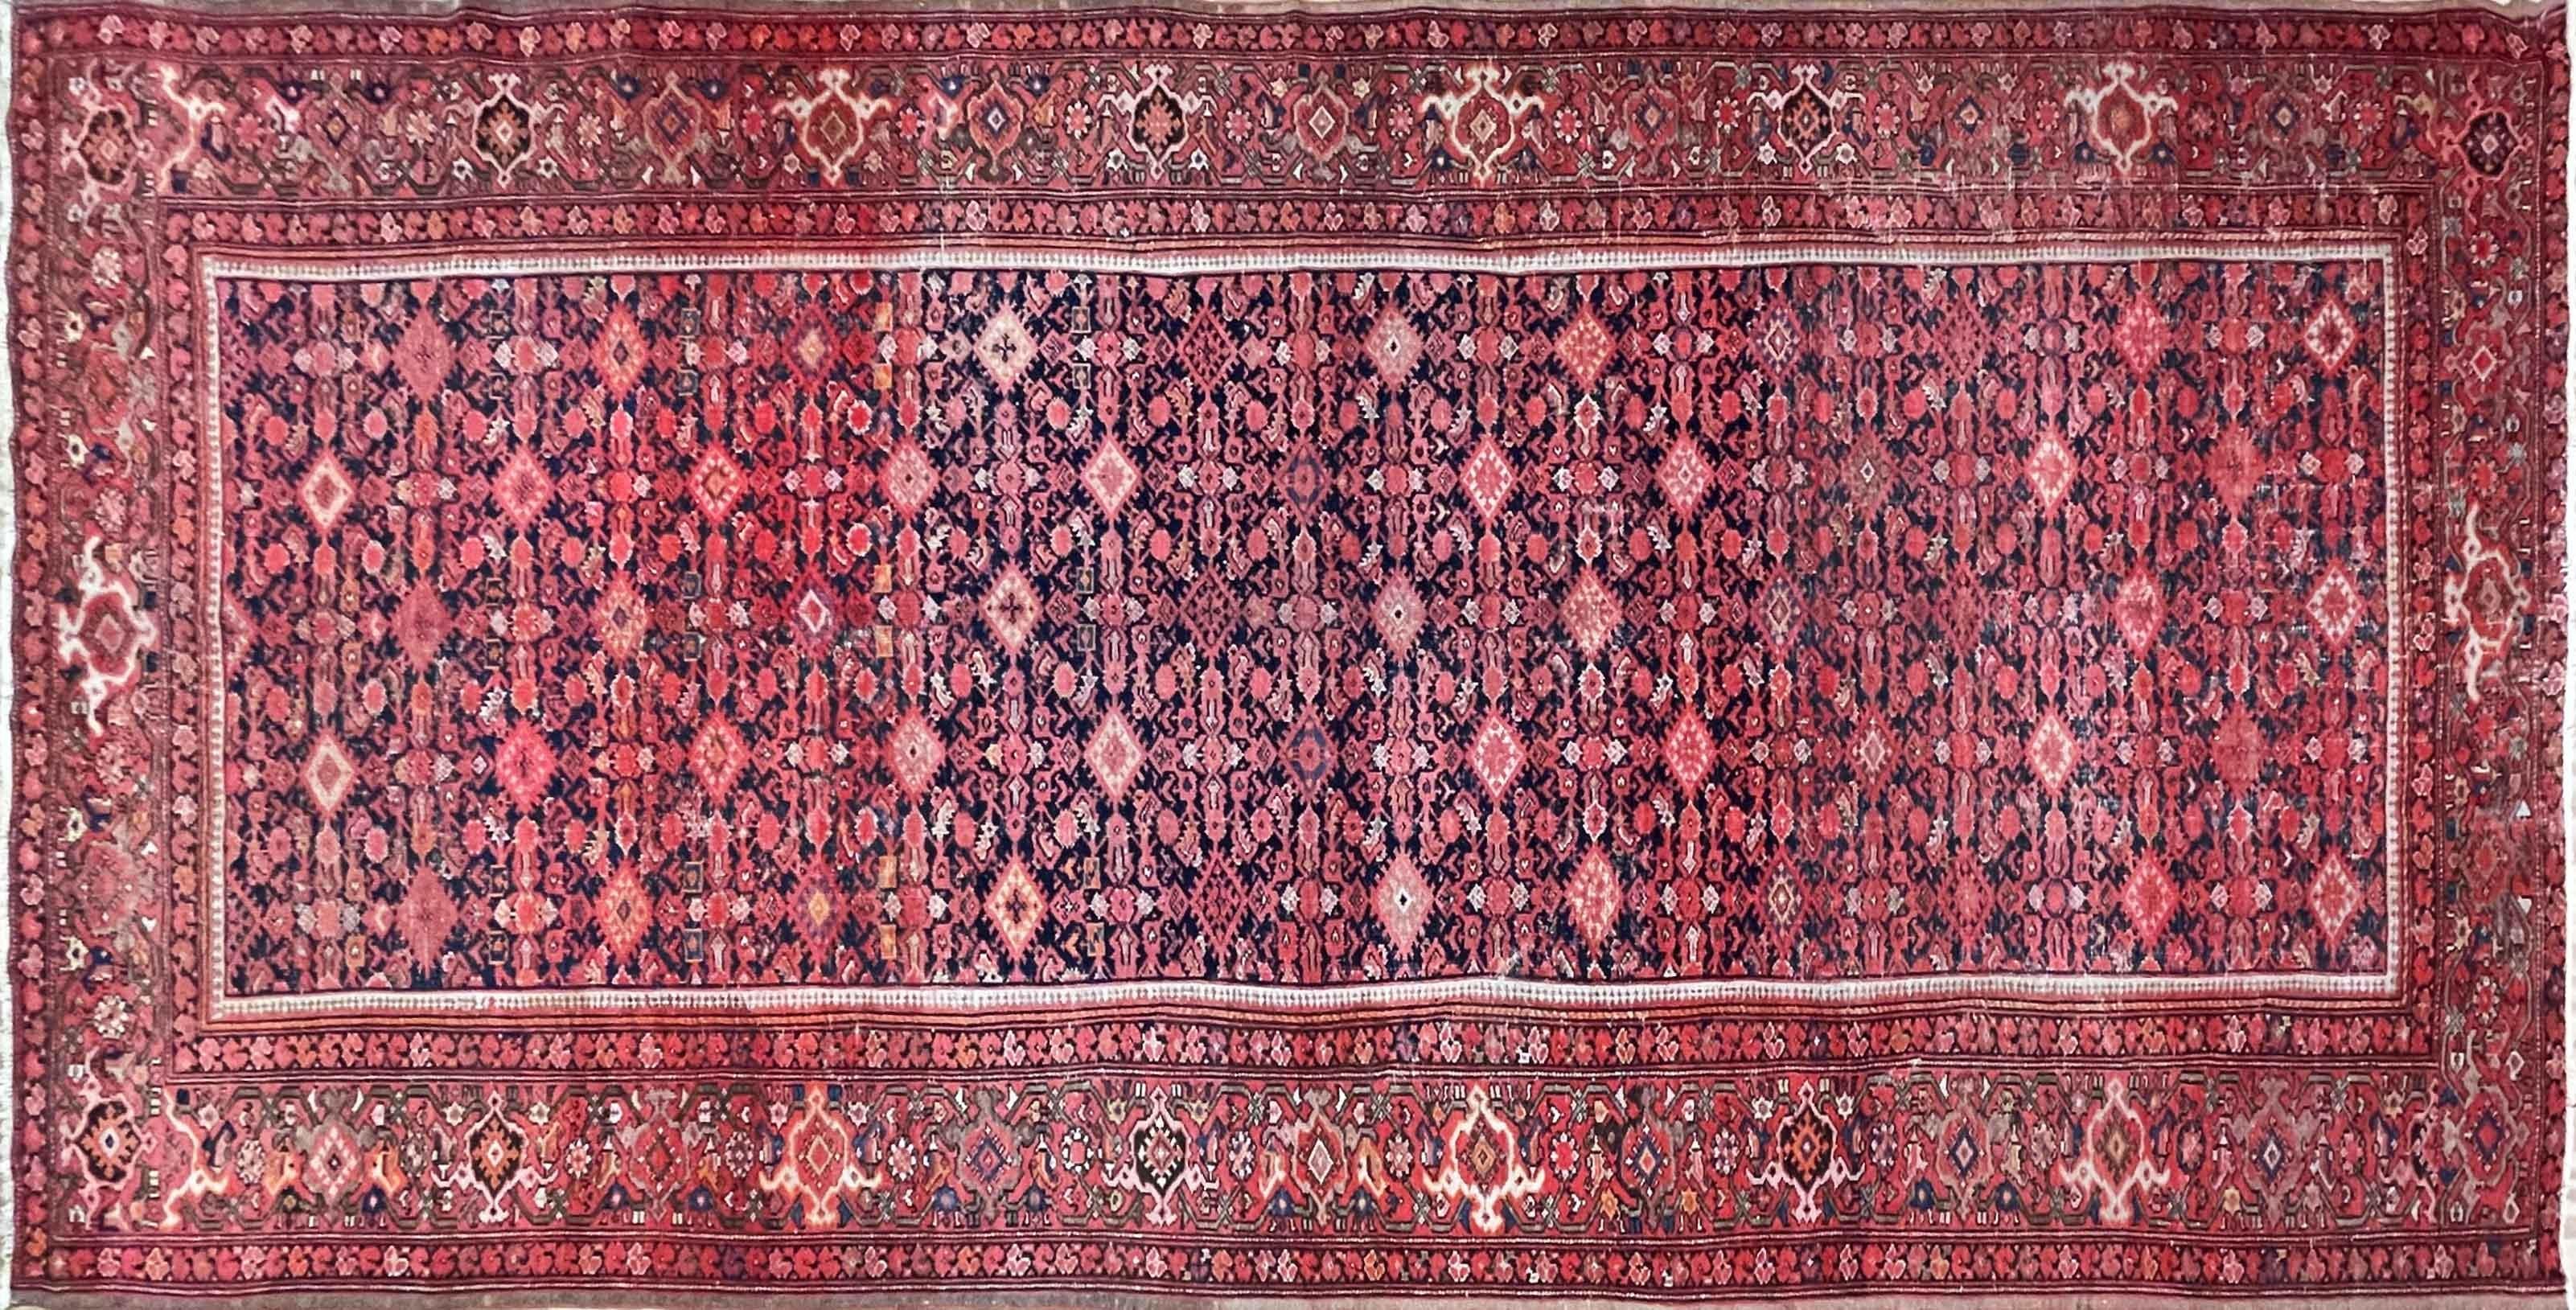 The tribal weavers in Malayer were often Turkish, and they employed the Turkish knot. The Gourde is a symmetrical knot, as opposed to the asymmetrical knot of many traditionally  creations. Additionally, antique Malayer rugs regularly enjoy a low